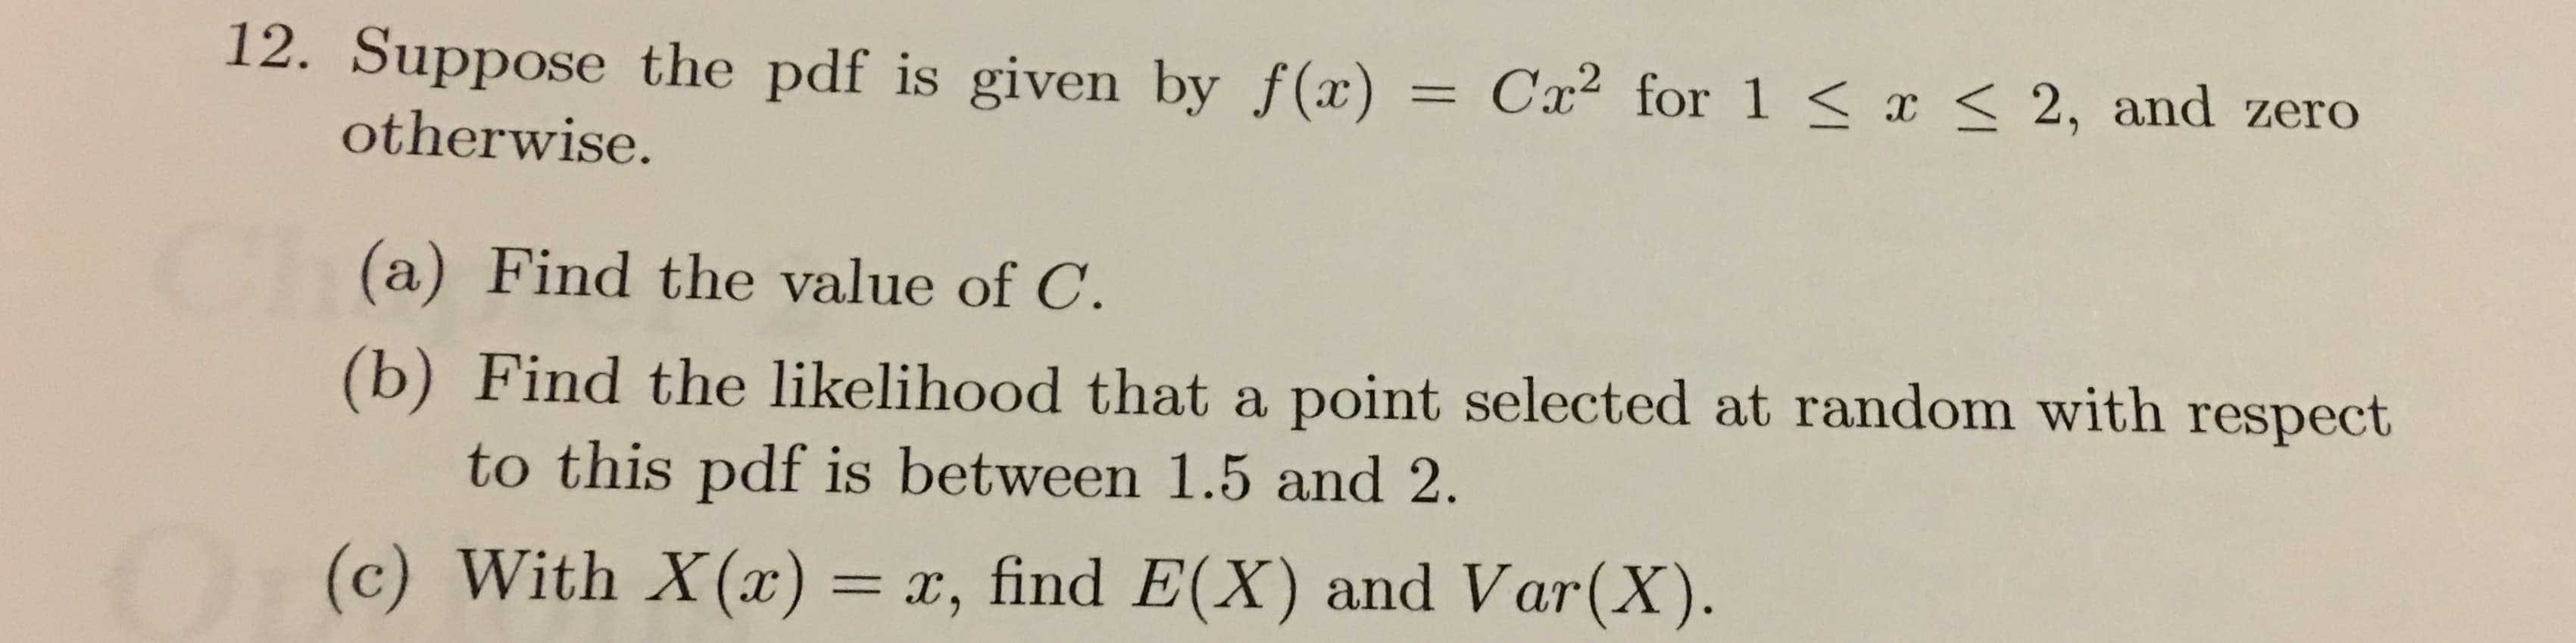 12. Suppose the pdf is given by f(x)
Cx2 for 1 < I < 2, and zero
otherwise.
(a) Find the value of C.
(b) Find the likelihood that a point selected at random with respect
to this pdf is between 1.5 and 2
(c) With X(x) = x, find E(X) and Var(X)
